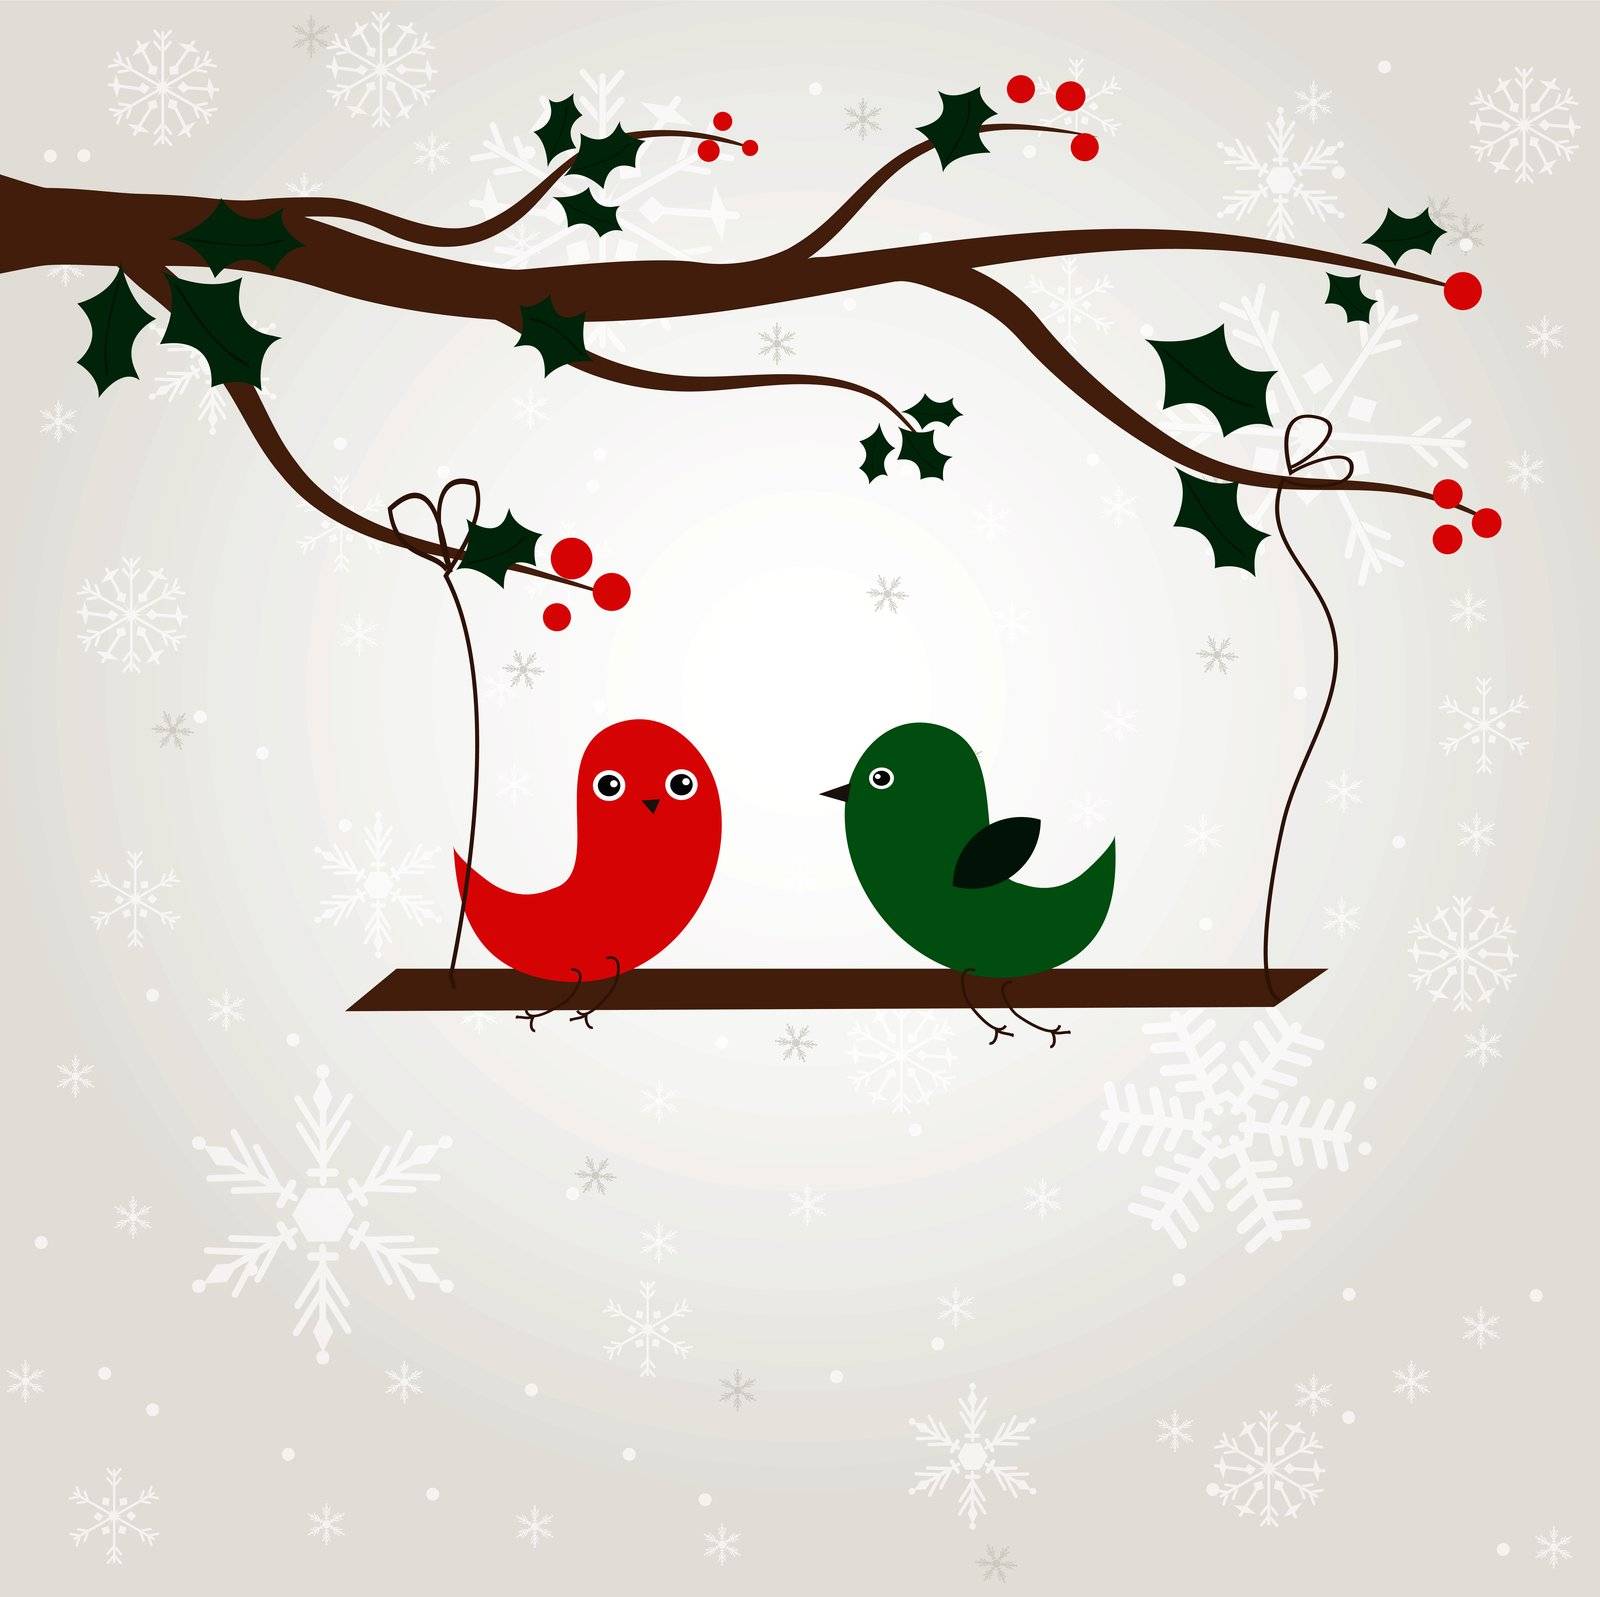 Cute greetings card with birds on a swing by mcherevan